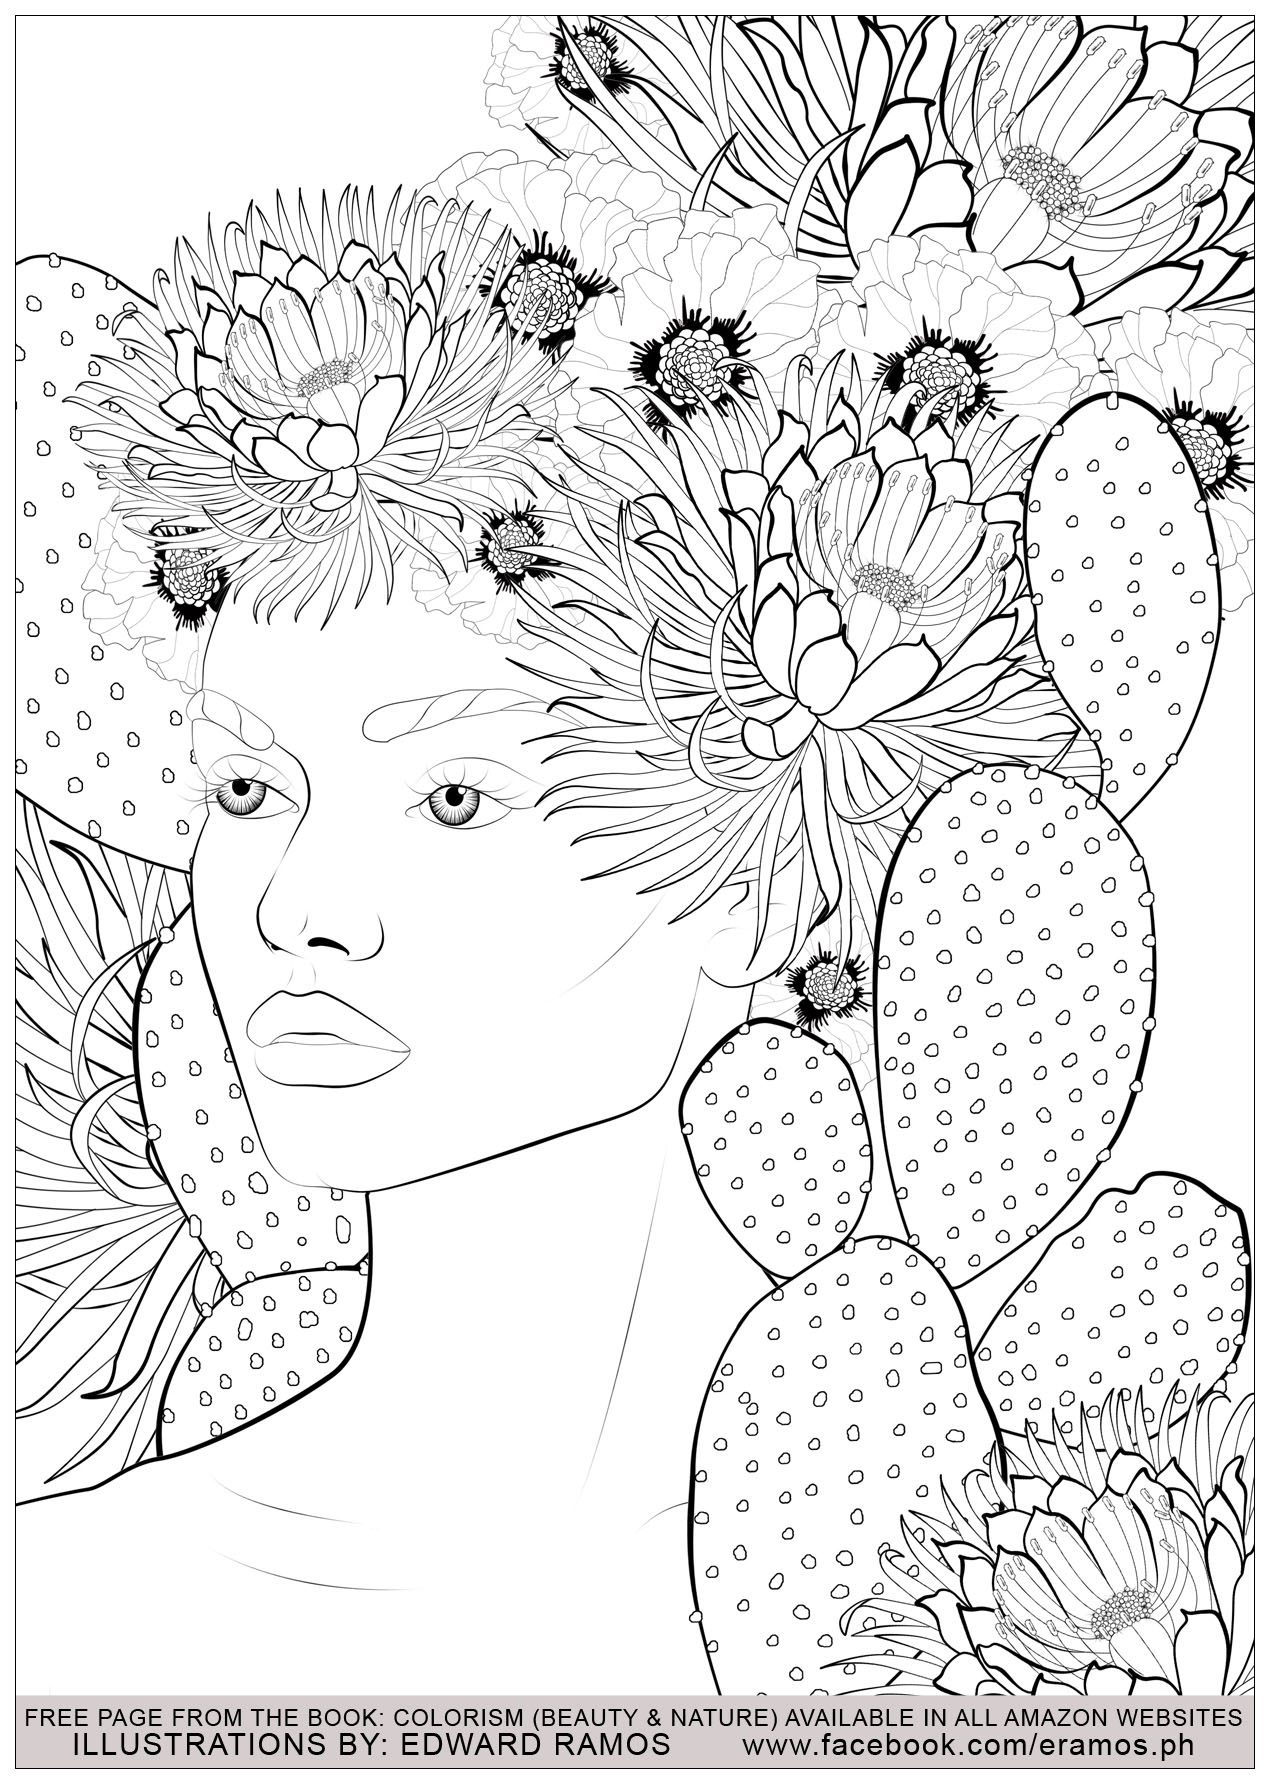 Illustration from the book Colorism - Beauty & Nature by Edward Ramos - 13, Artist : Edward Ramos